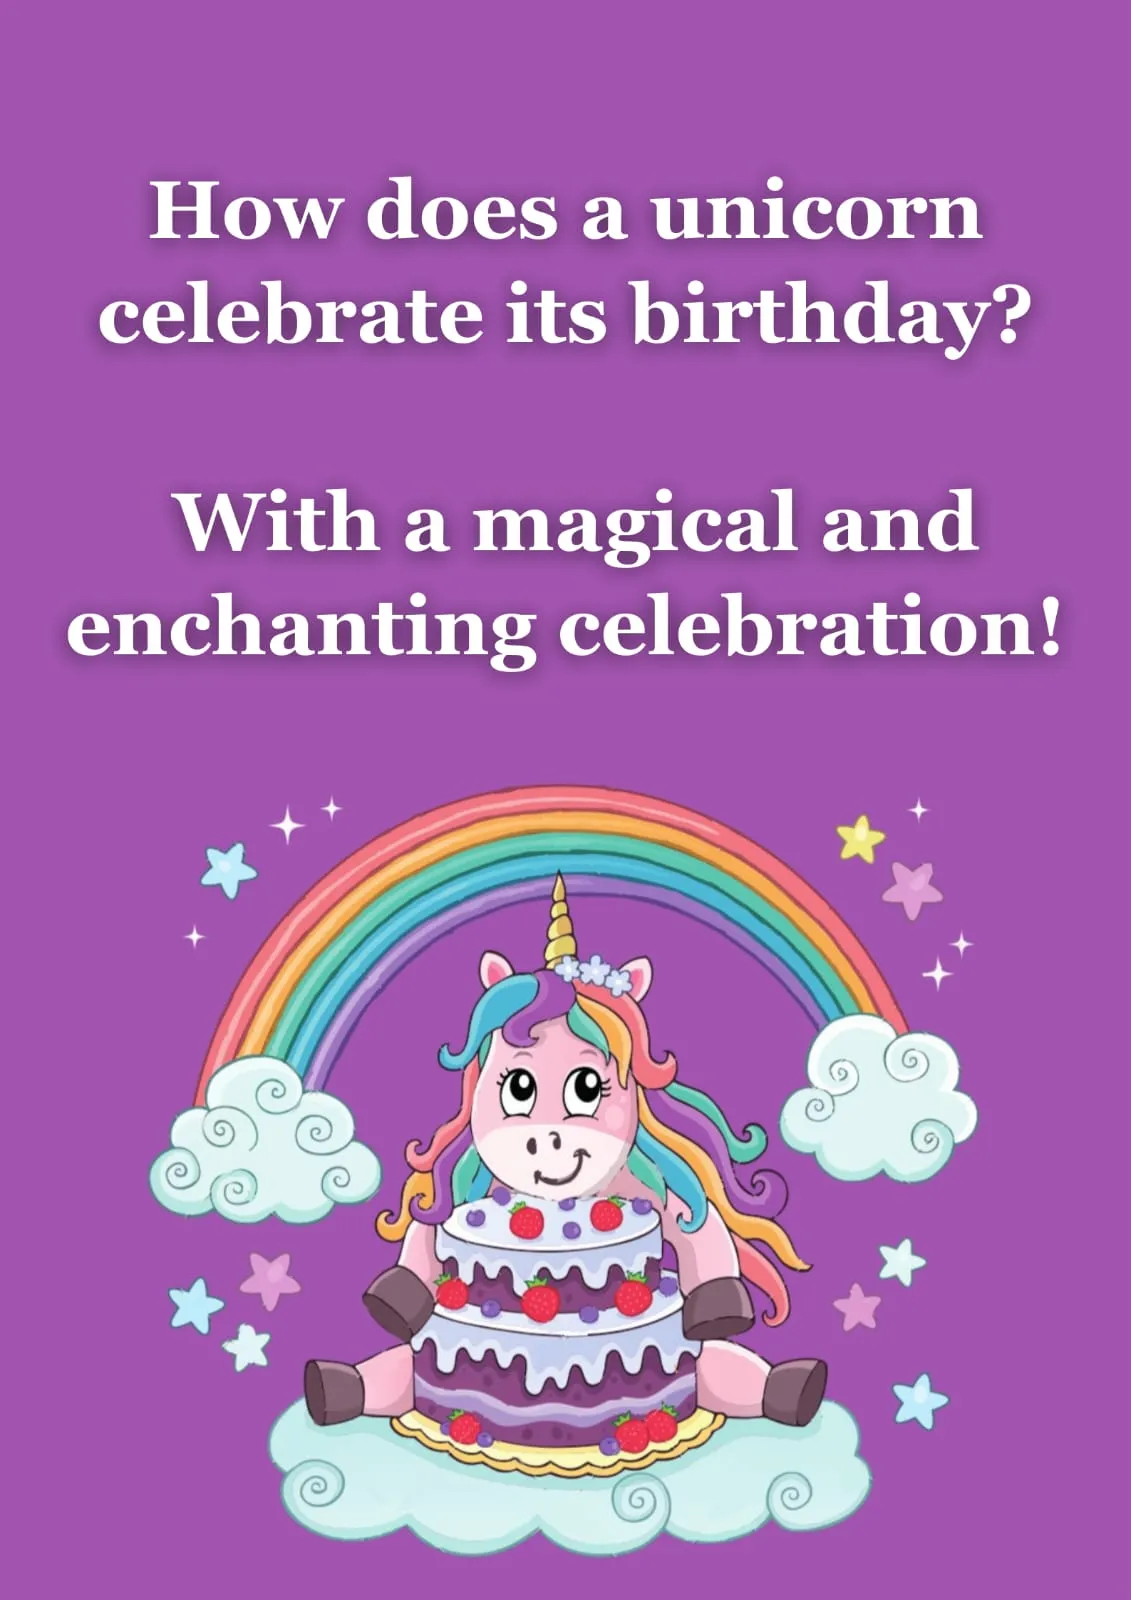 How does a unicorn celebrate its birthday?